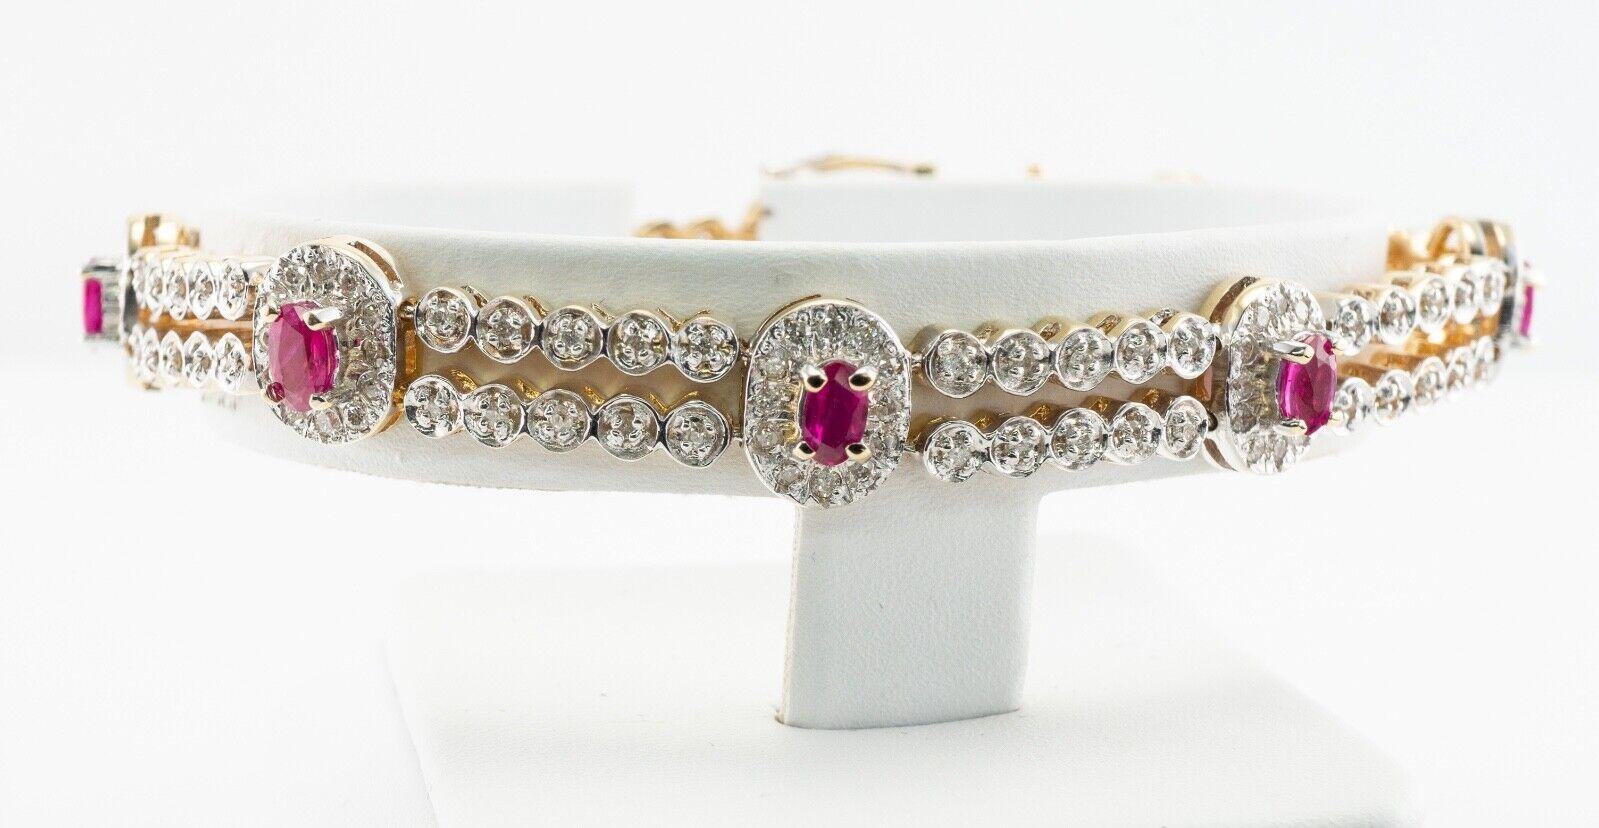 This terrific estate bracelet is finely crafted in solid 14K White Gold for the top and Yellow Gold for the back, and set with natural Earth mined Rubies and Diamonds. There are 8 oval cut Rubies in this bracelet totaling 2.80 carats. The rubies are